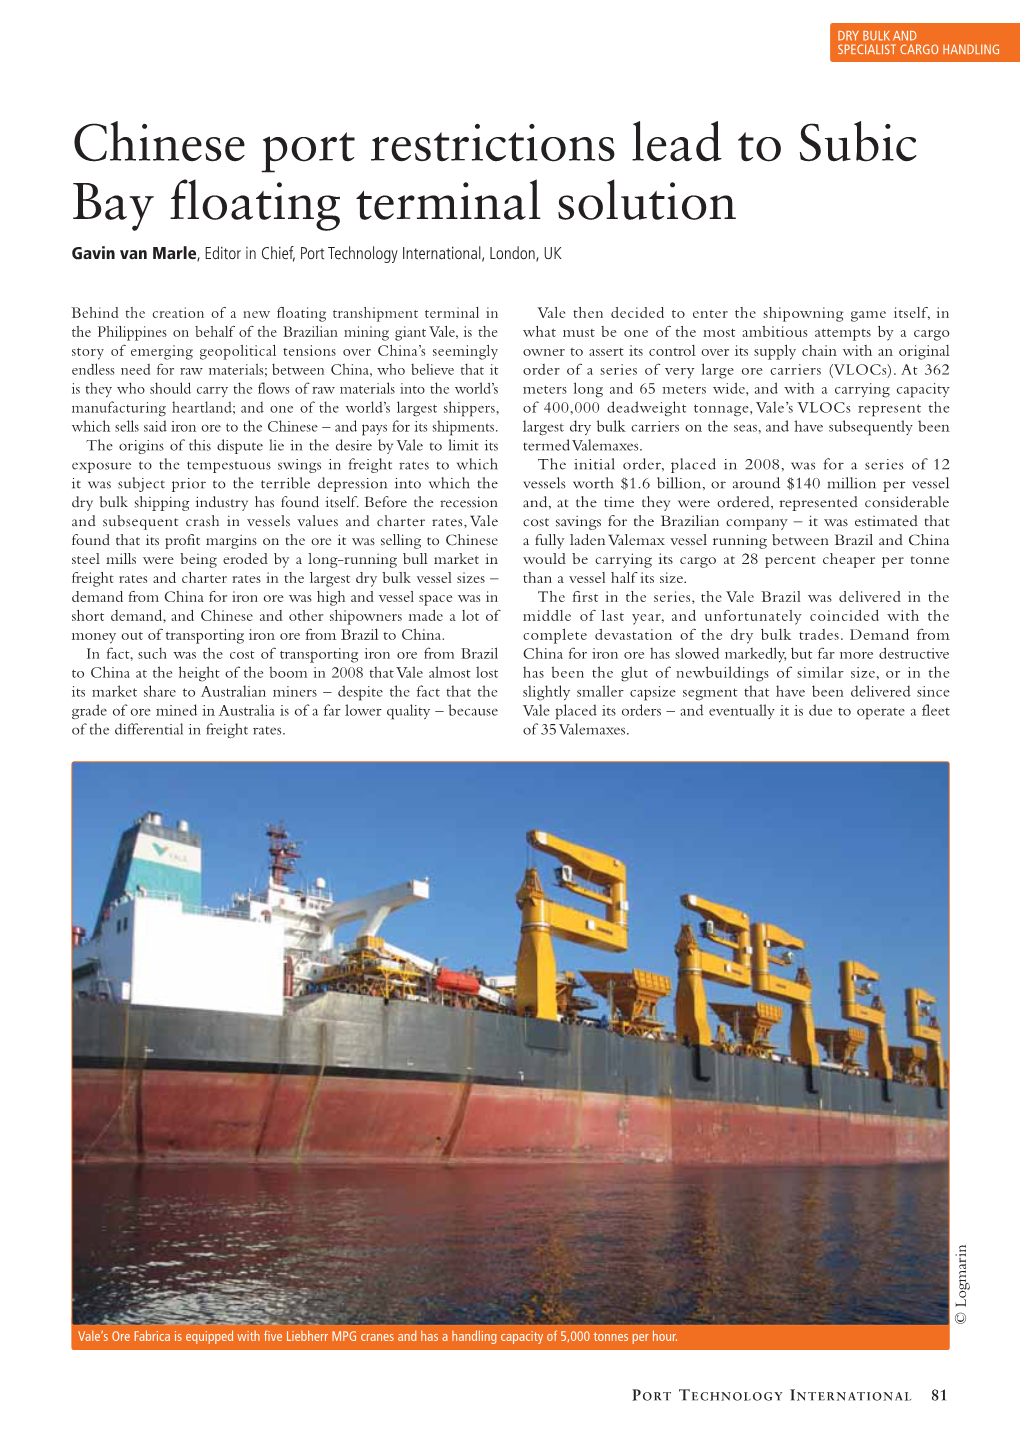 Chinese Port Restrictions Lead to Subic Bay Floating Terminal Solution Gavin Van Marle, Editor in Chief, Port Technology International, London, UK